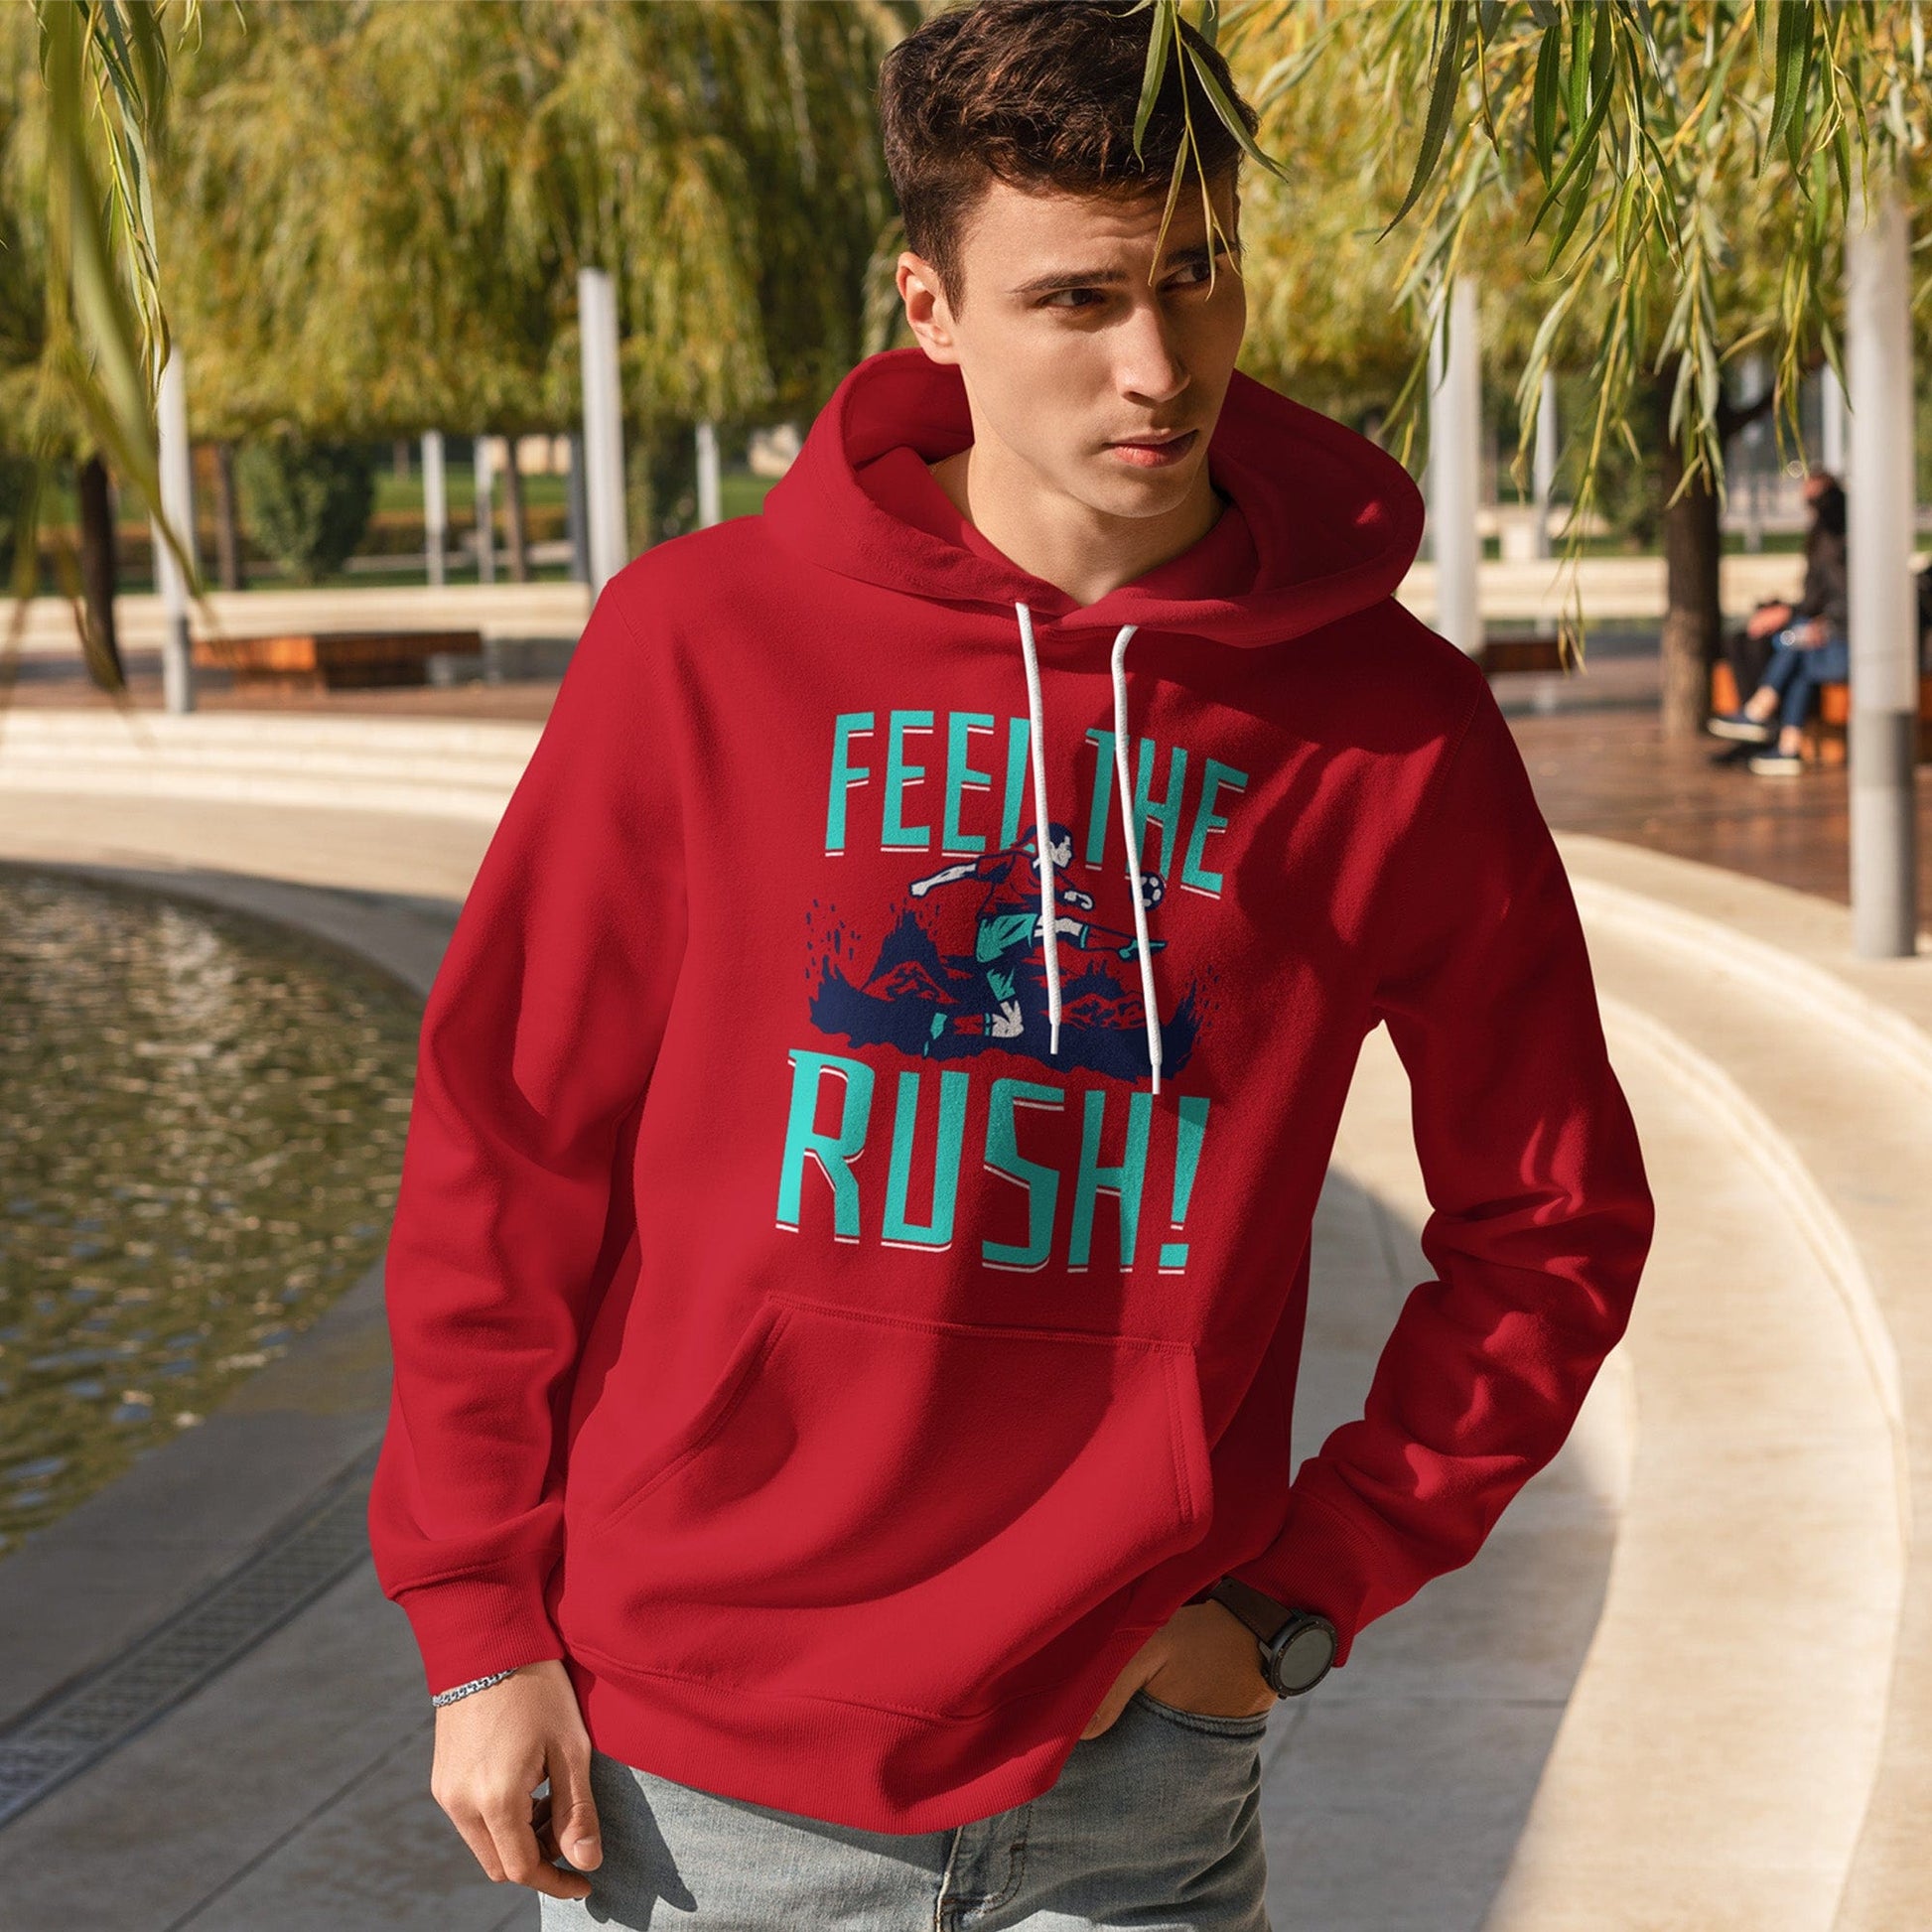 KC Swag Kansas City Current FEEL THE RUSH on red fleece pullover hoodie worn by male model near water in a public park